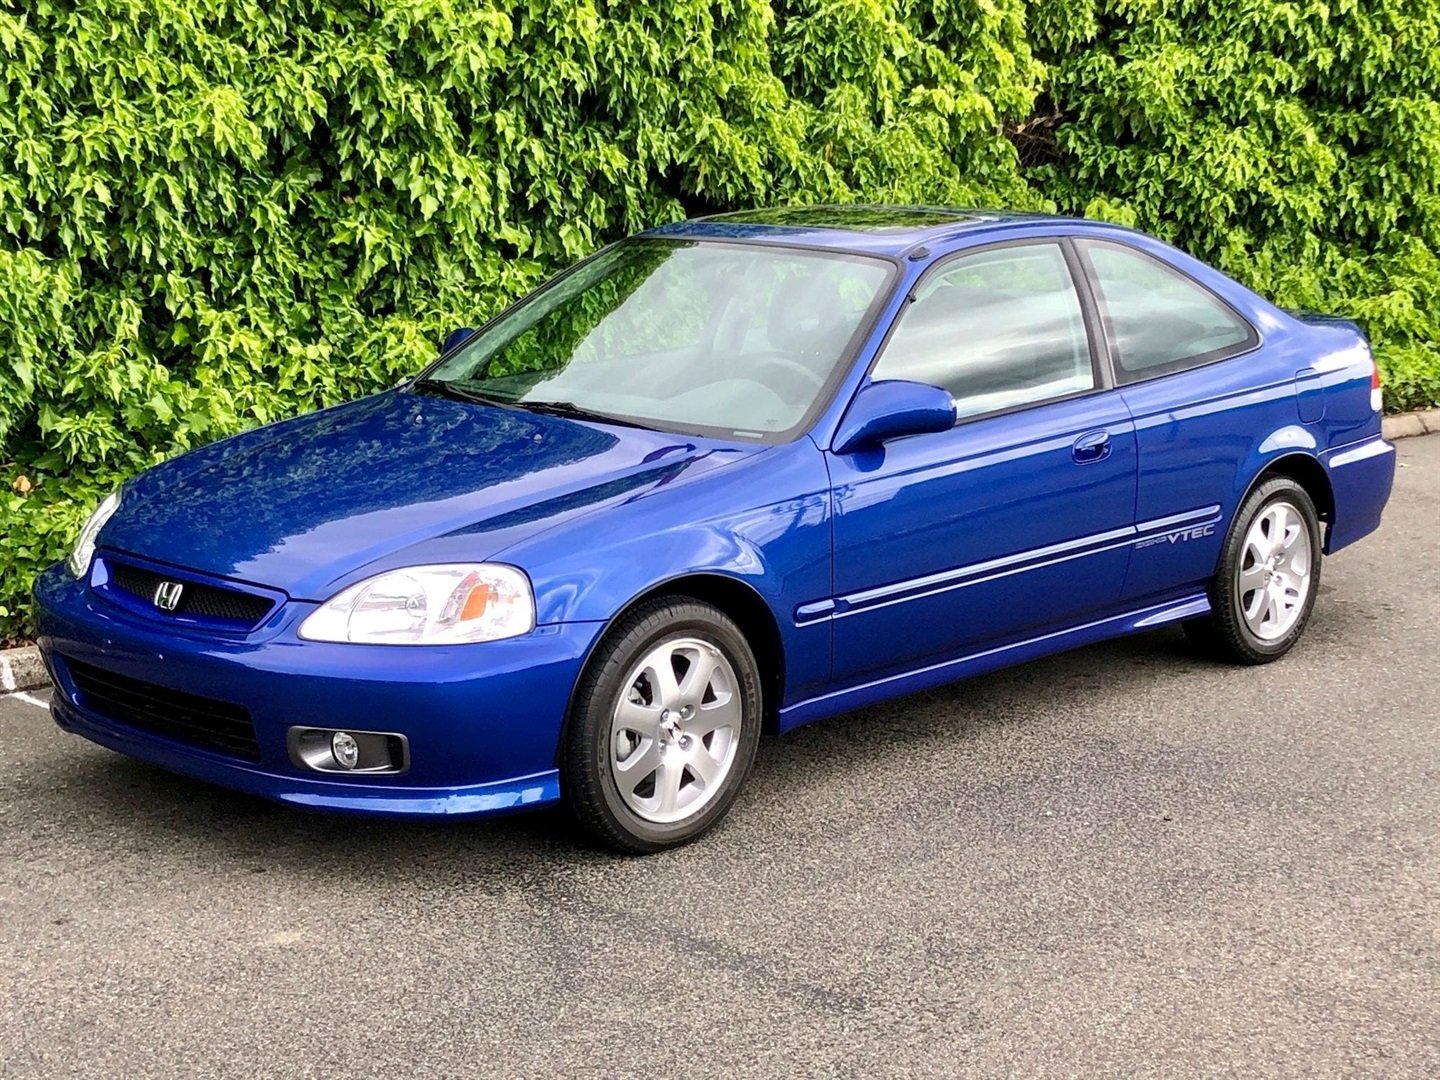 A 20yearold Honda Civic sold for R870,000 at an auction in the US